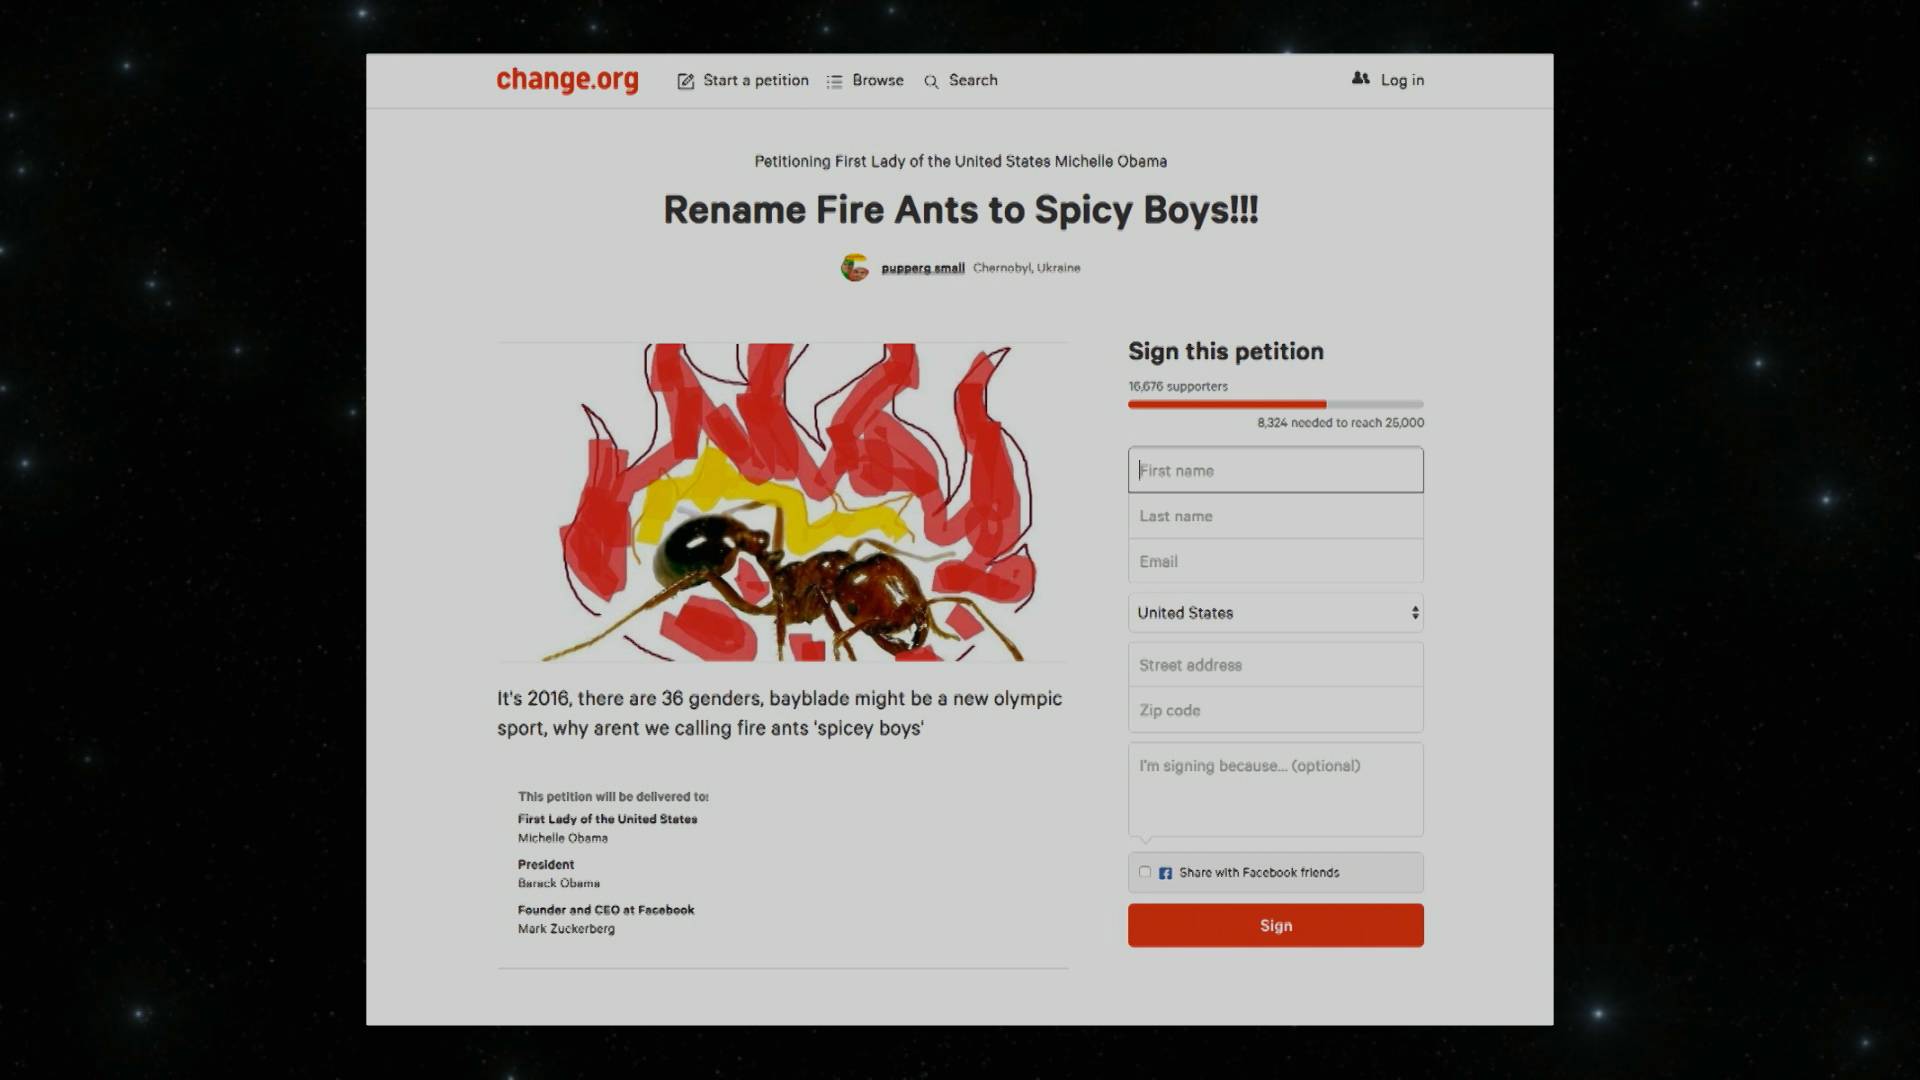 Rename Fire Ants to Spicy Boys petition on Change.org